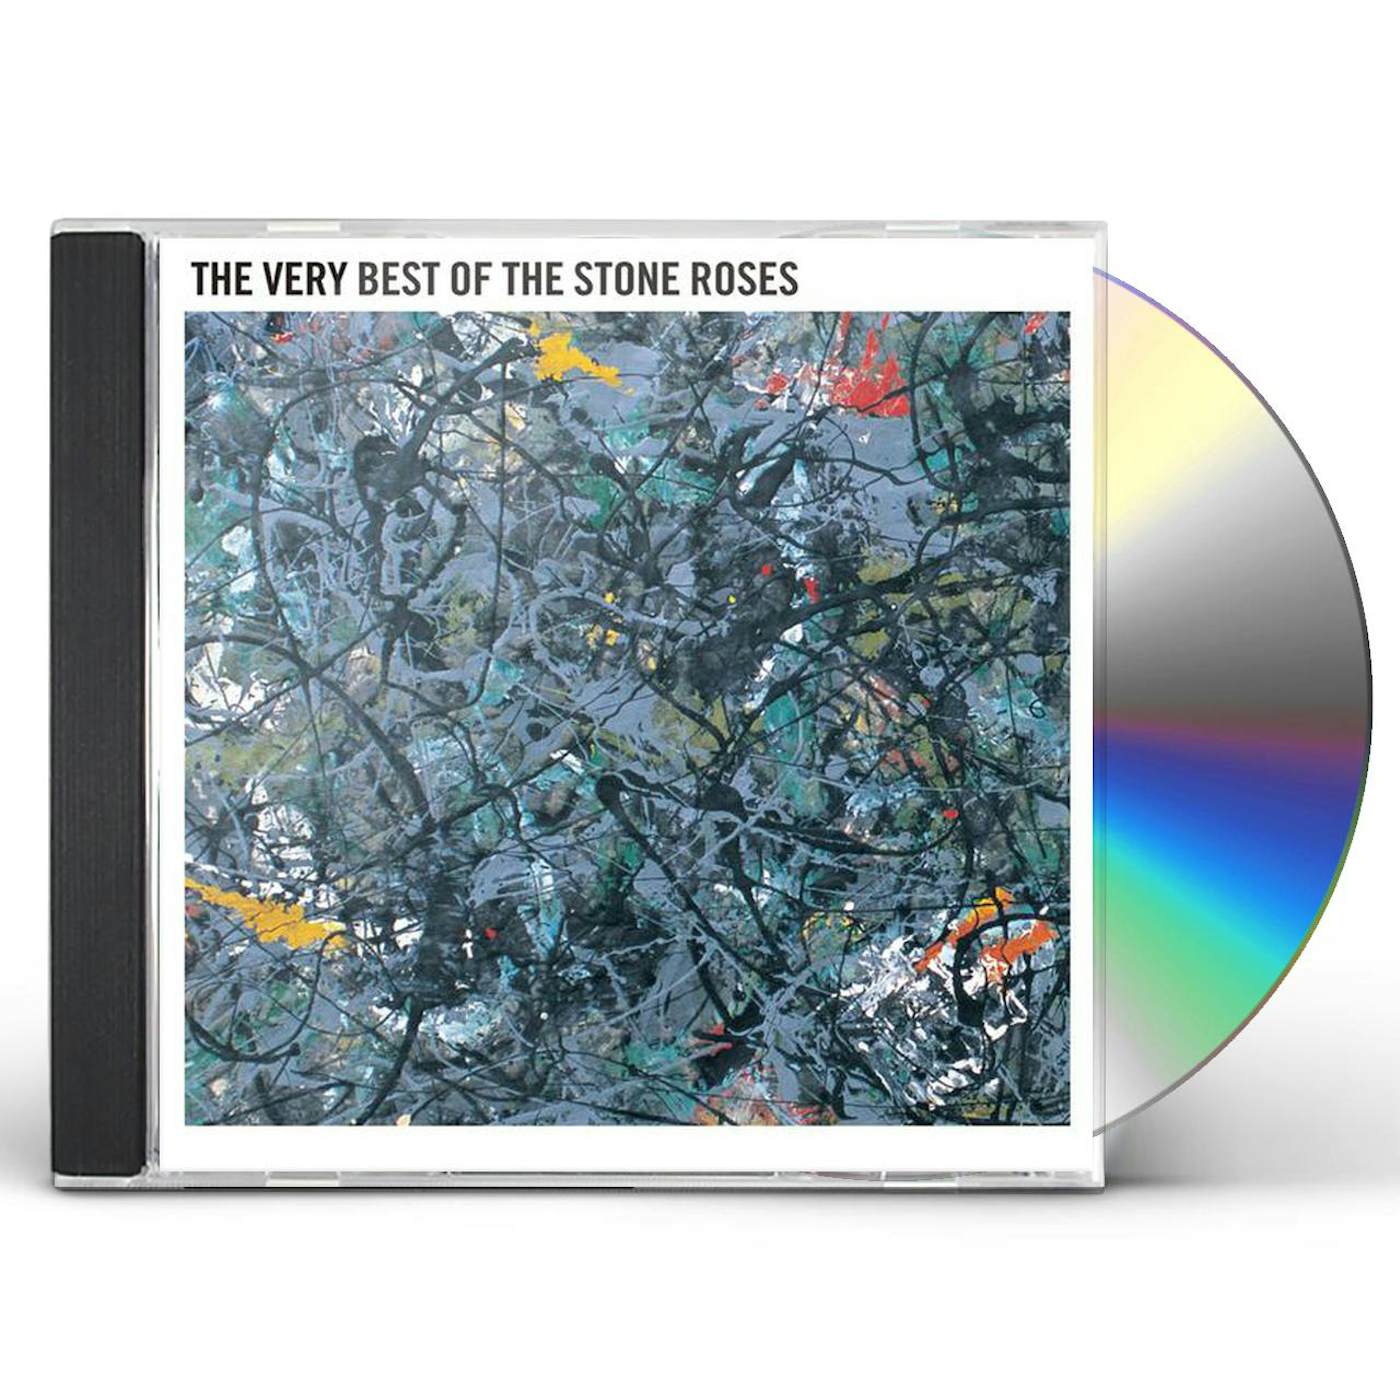 VERY BEST OF THE STONE ROSES CD